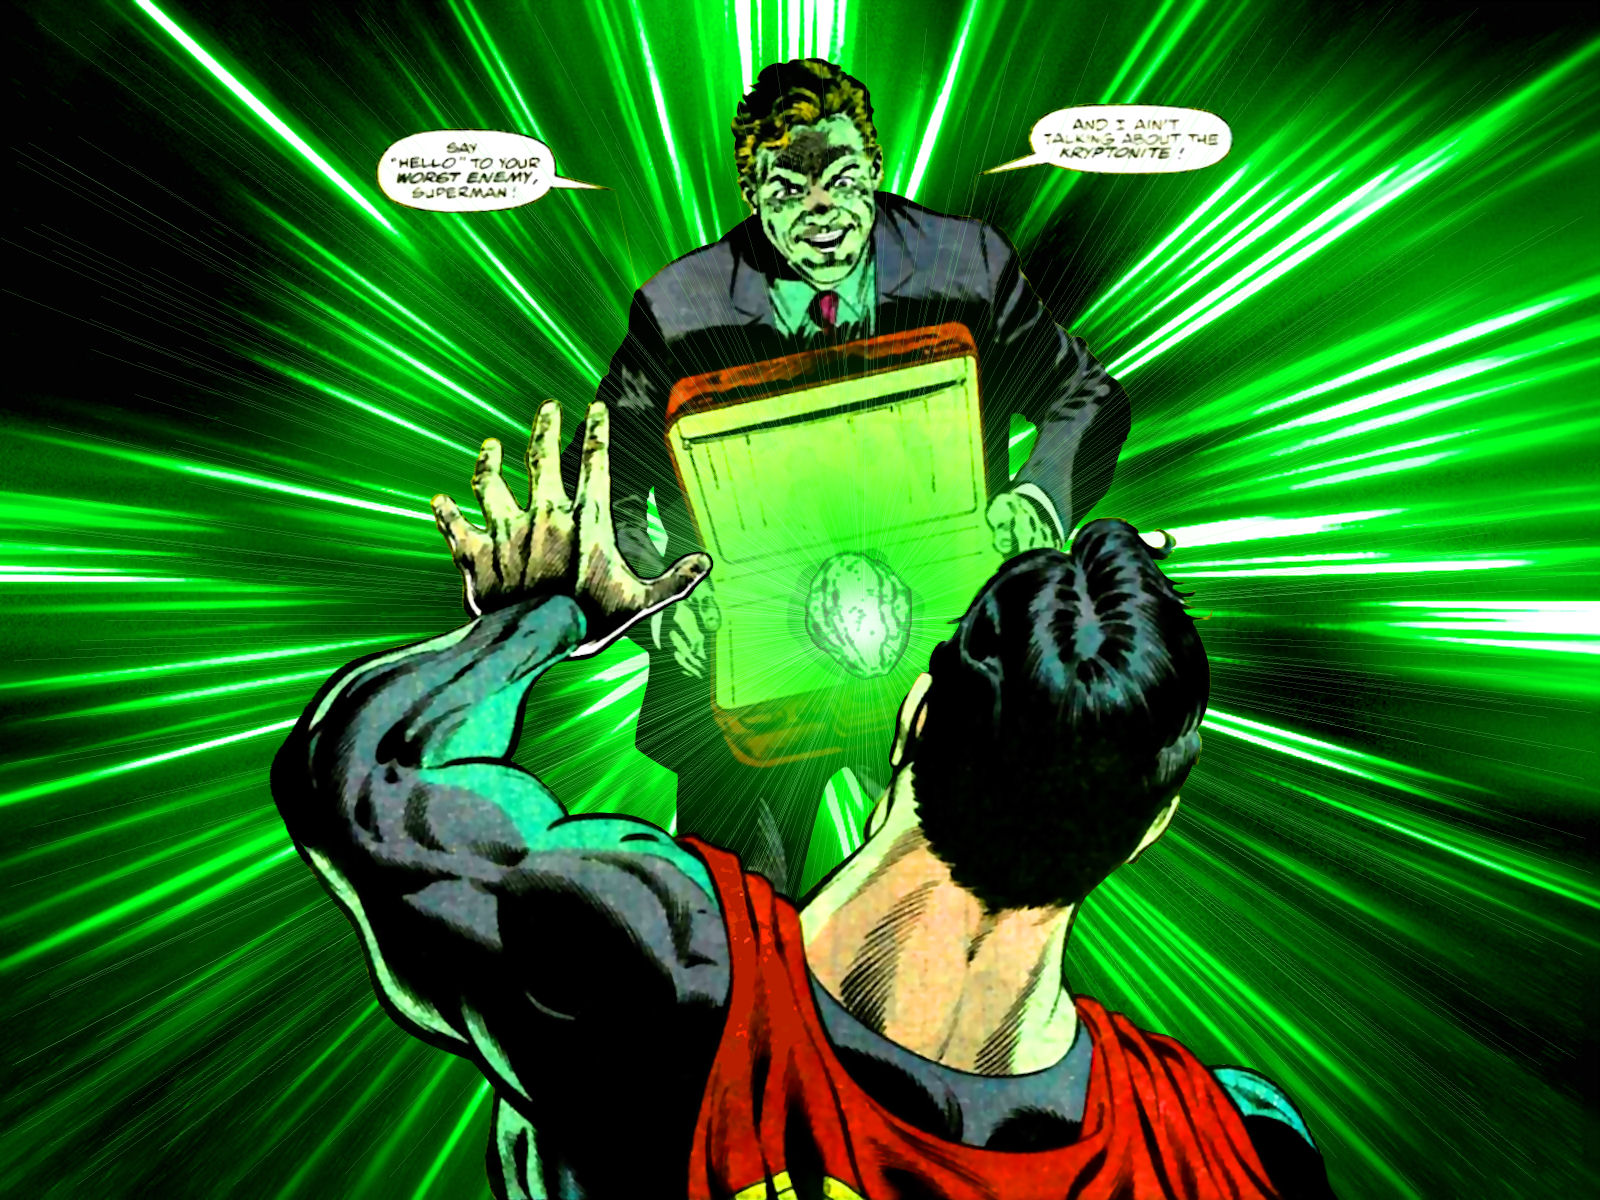  — why it is, exactly, that kryptonite is so damaging to Superman